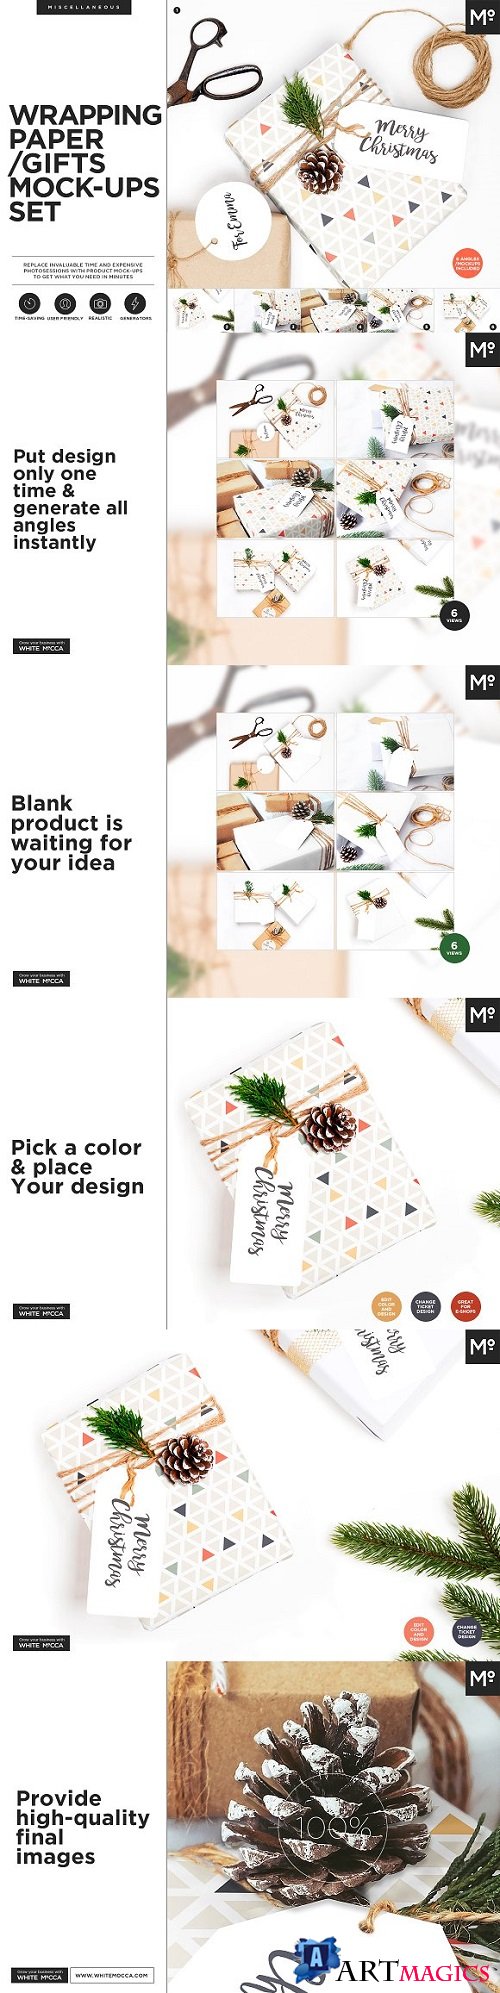 Wrapping Paper Gifts Mock-ups Set 2156718